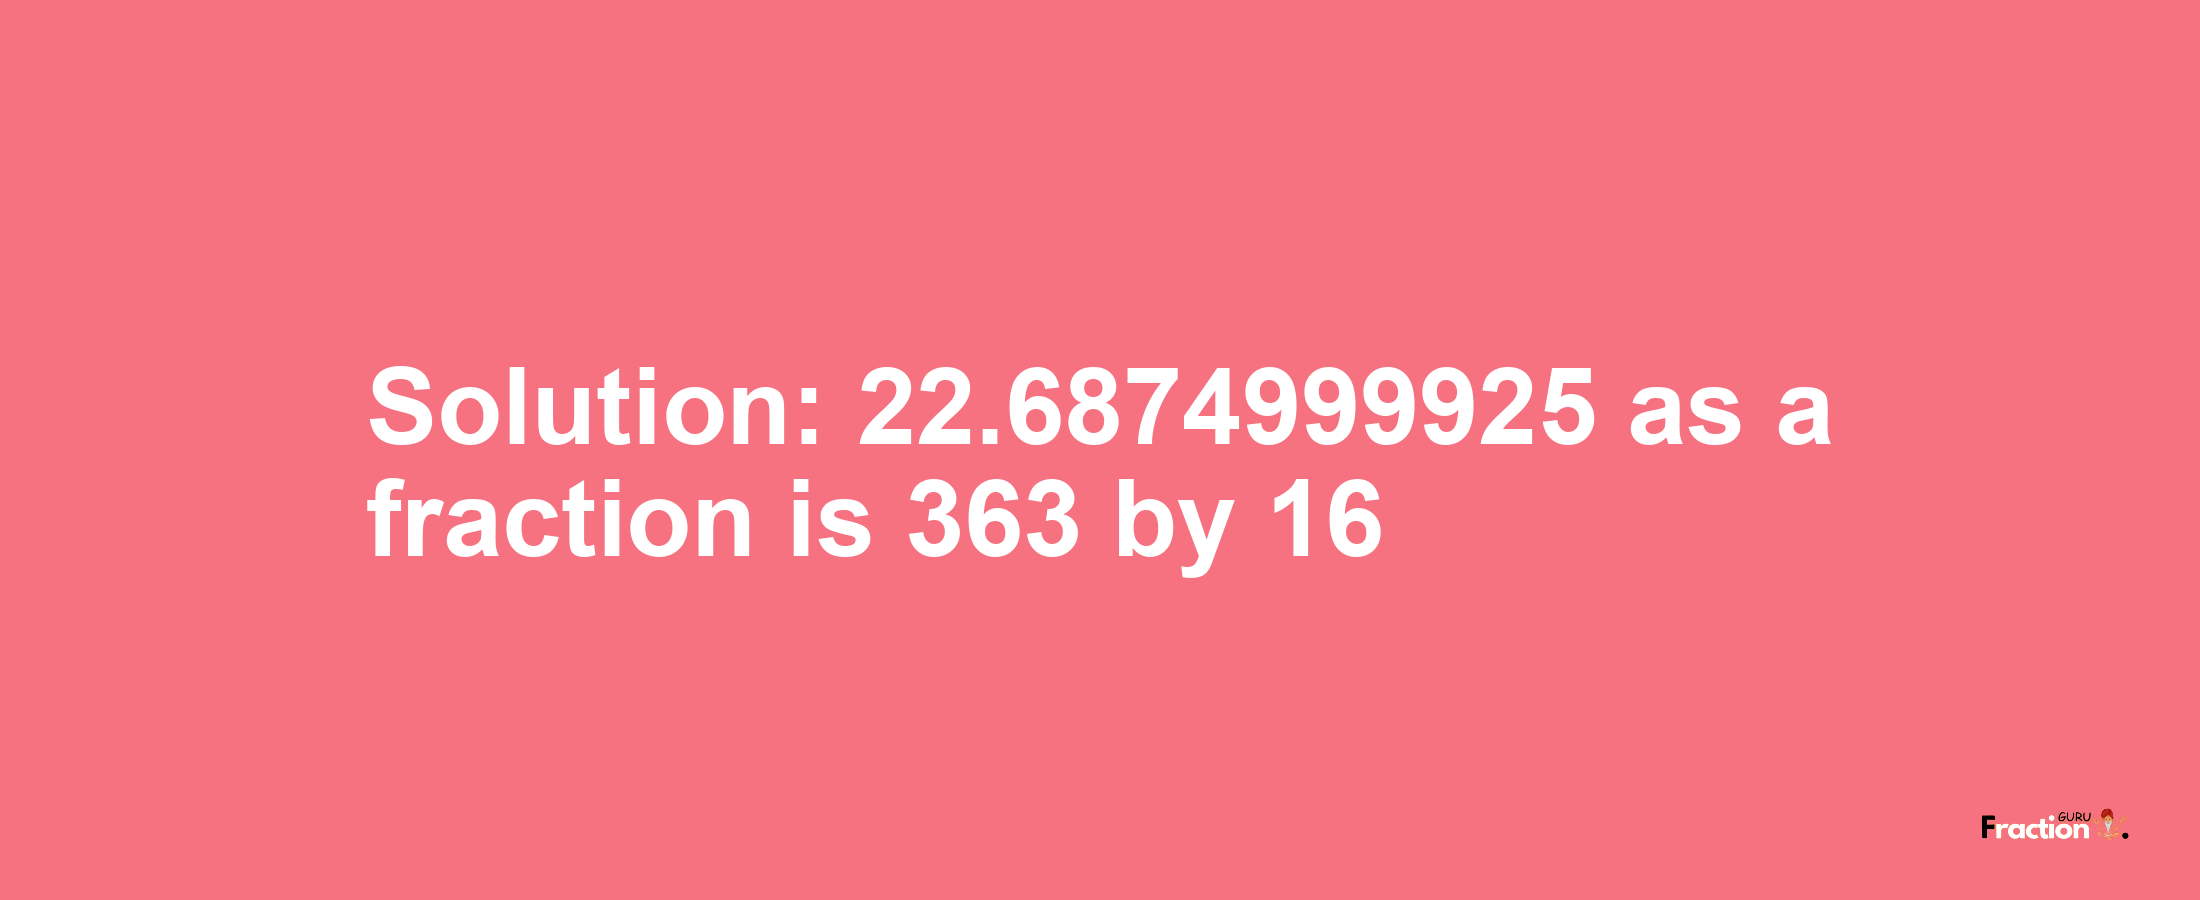 Solution:22.6874999925 as a fraction is 363/16